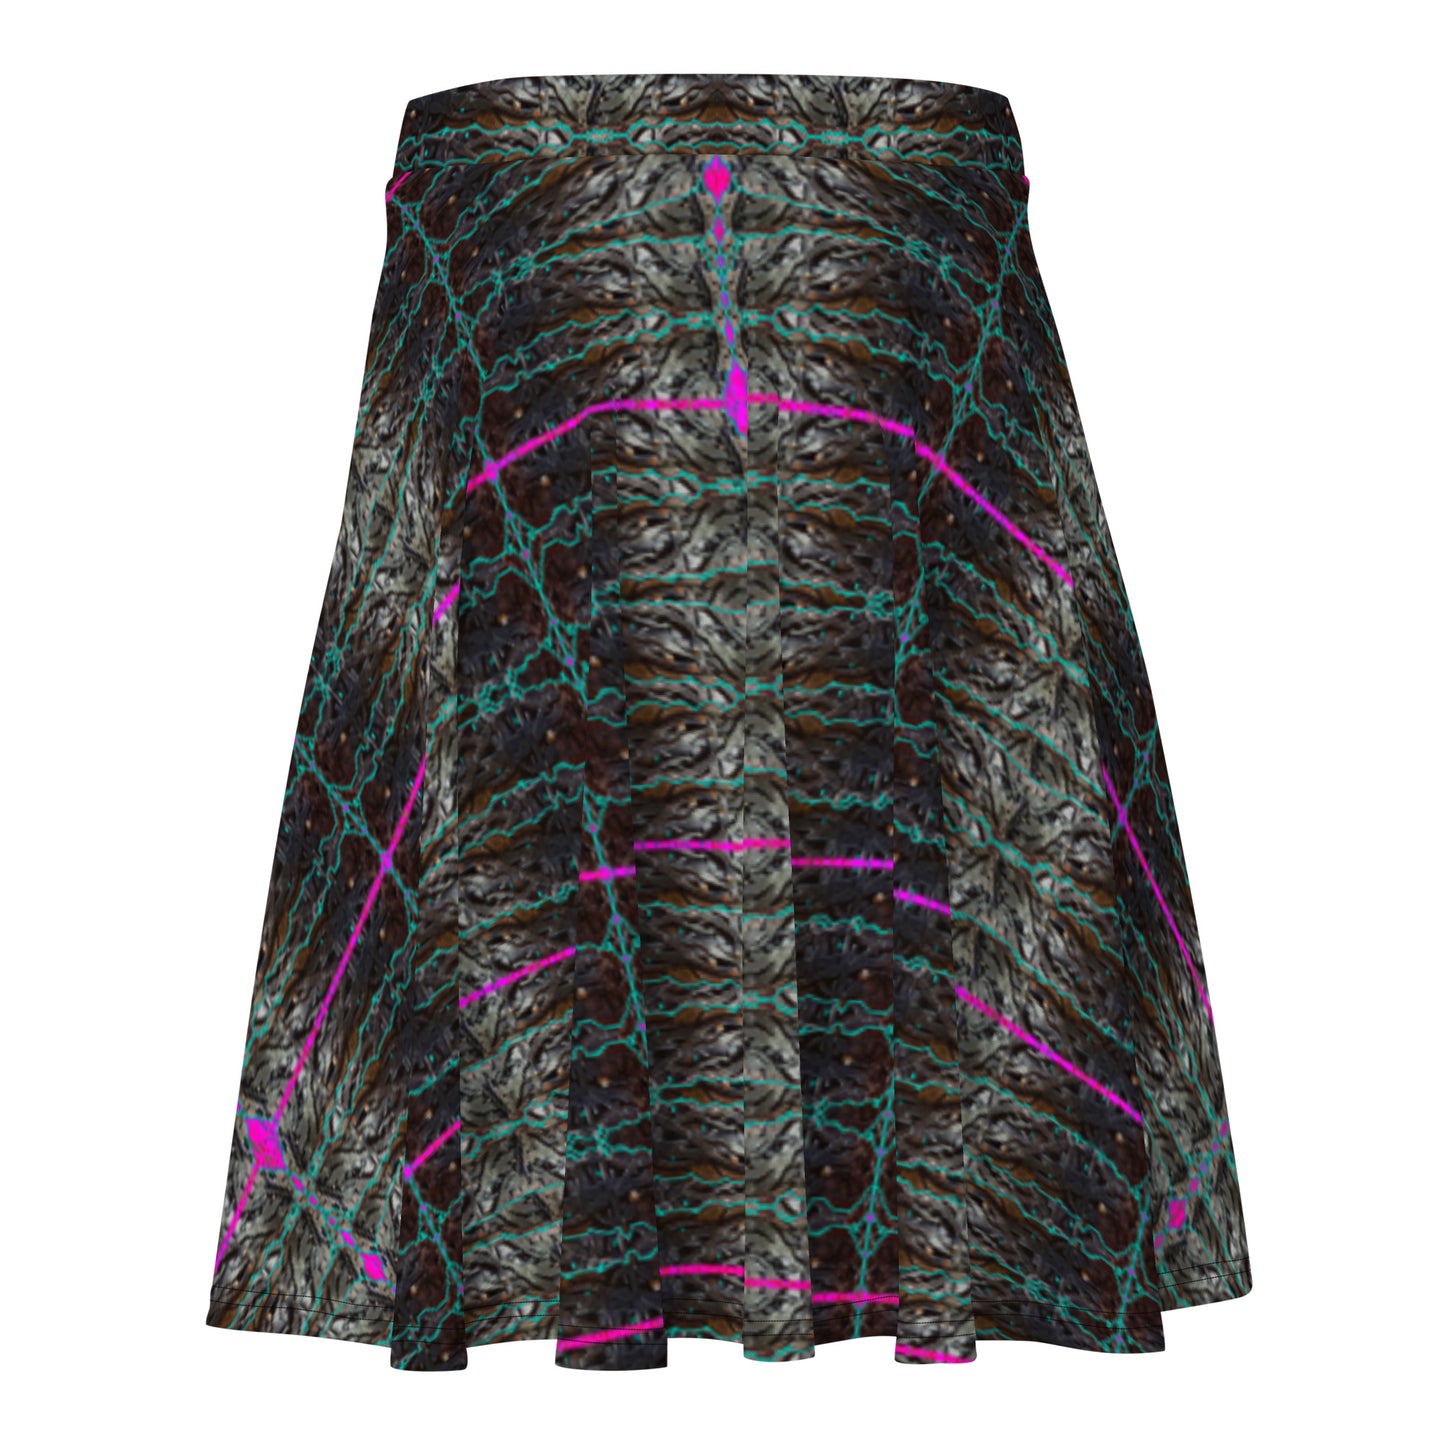 Skater Skirt (Her/They)(Tree Link Rind #8) RJSTH@Fabric#8 RJSTHW2021 RJS